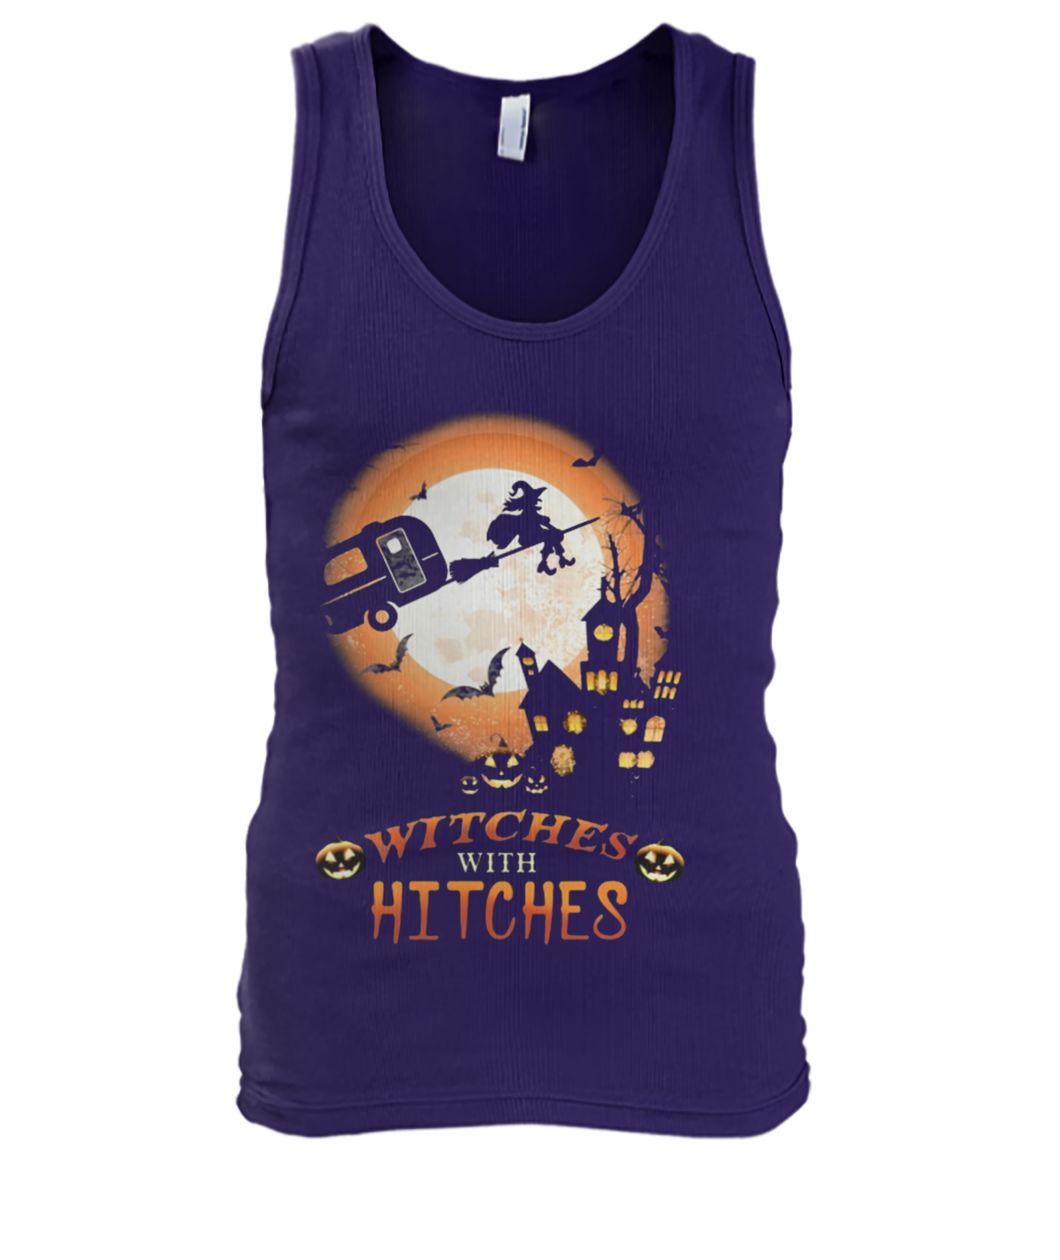 Witches with hitches halloween men's tank top